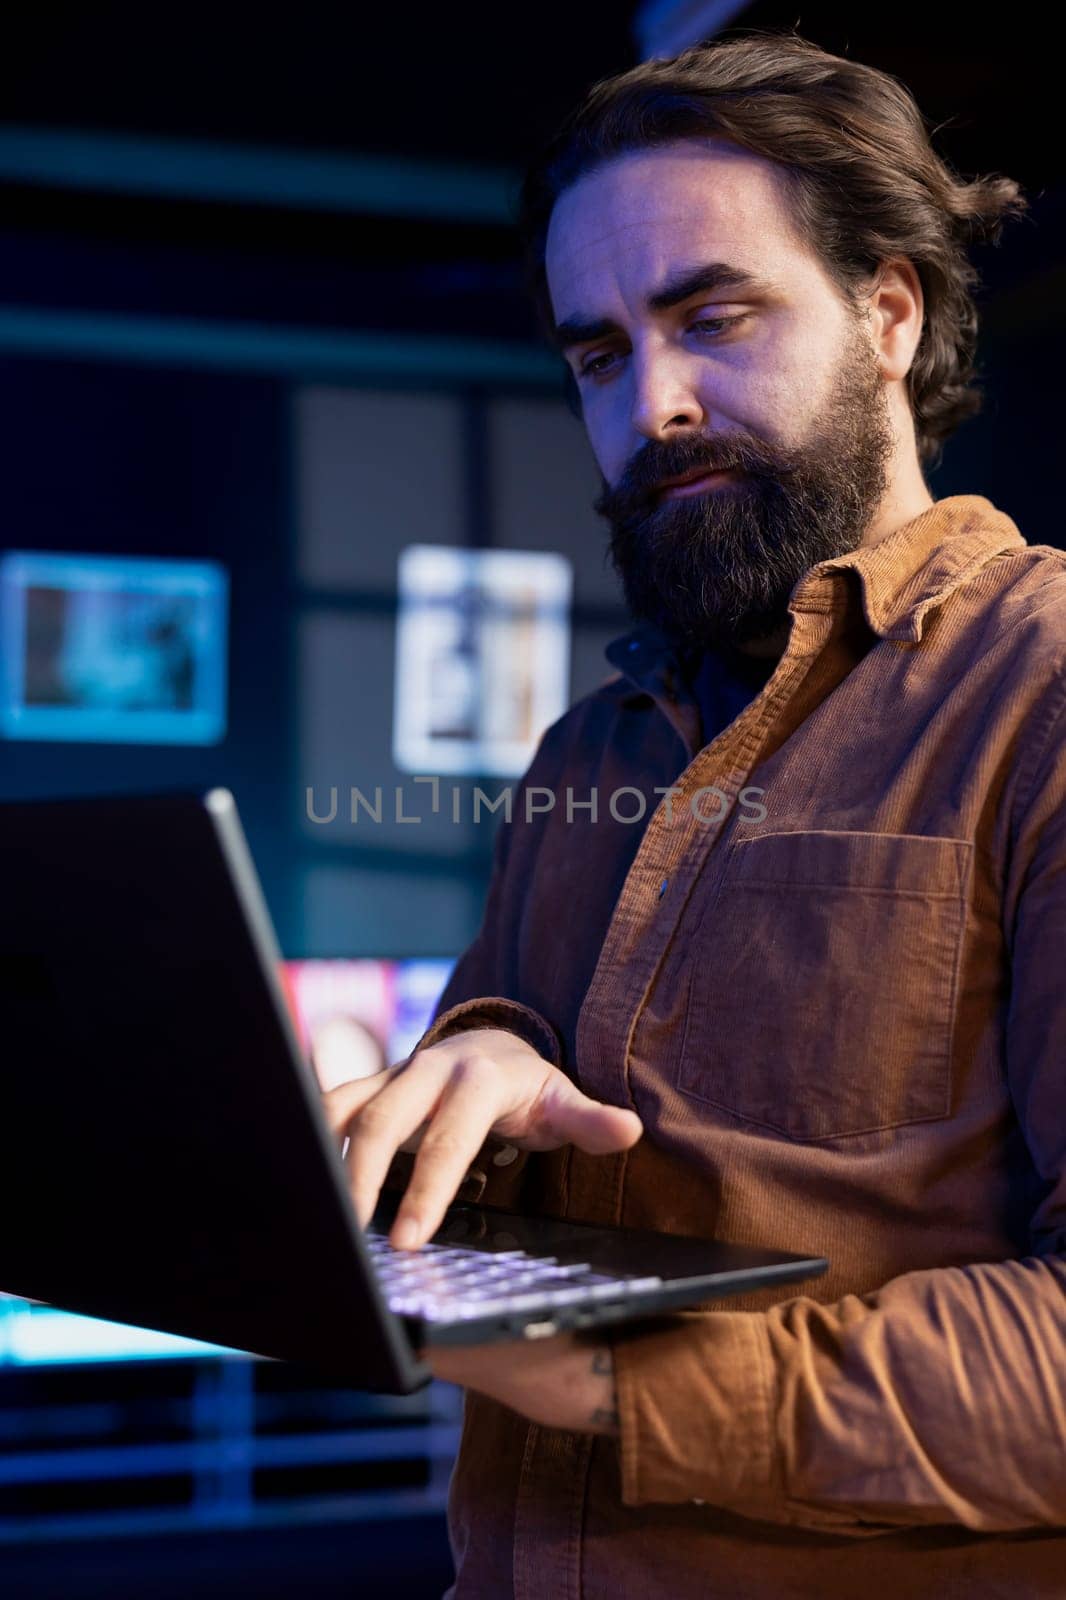 Programmer doing software quality assurance, reading source code on laptop by DCStudio